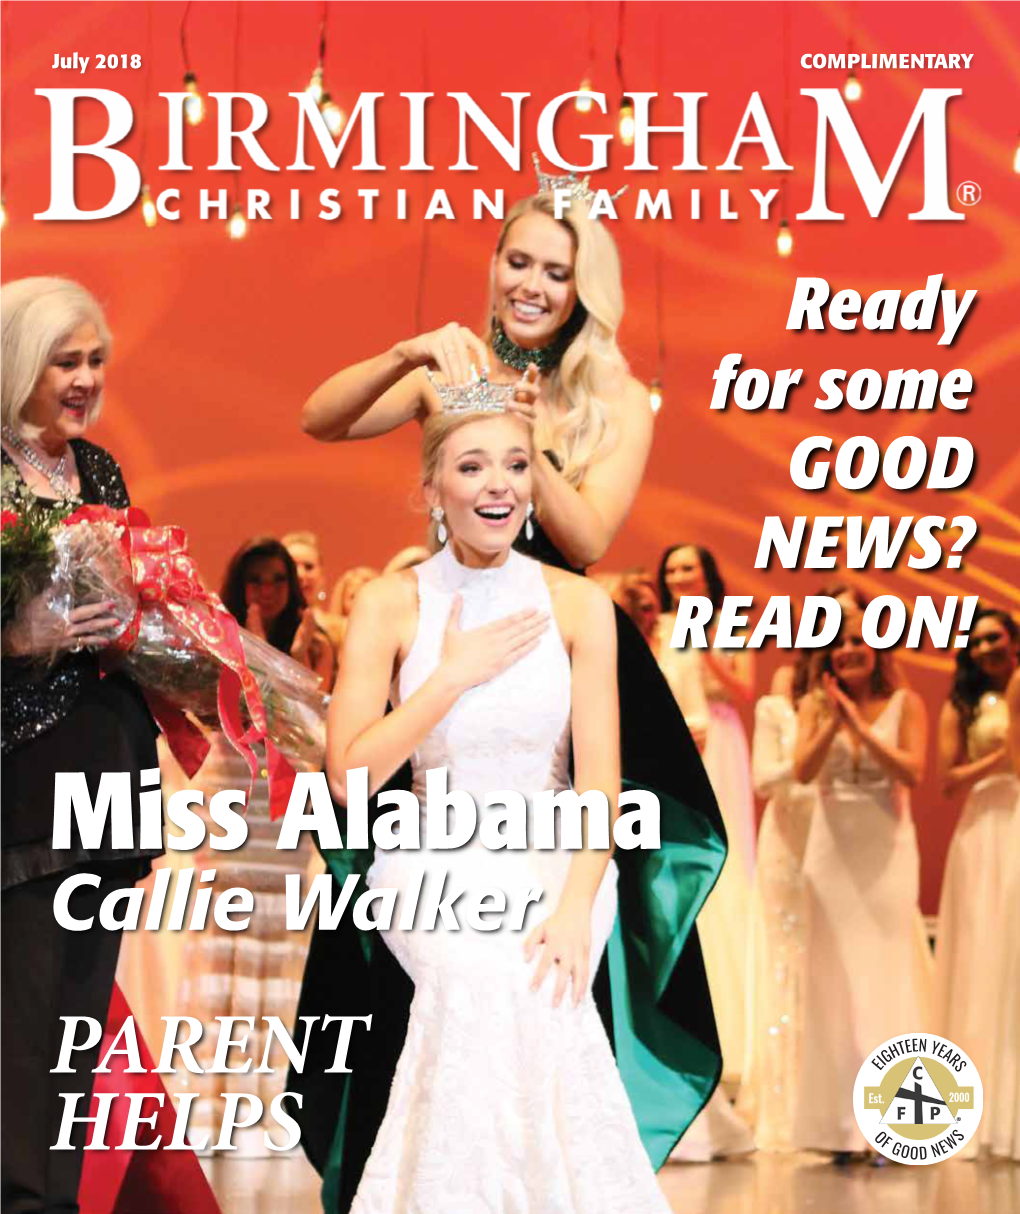 Miss Alabama Callie Walker PARENT HELPS ® We Do Not Charge a Brown Service Administrative Fee When a Brown Service Burial Policy Is Used by a Family